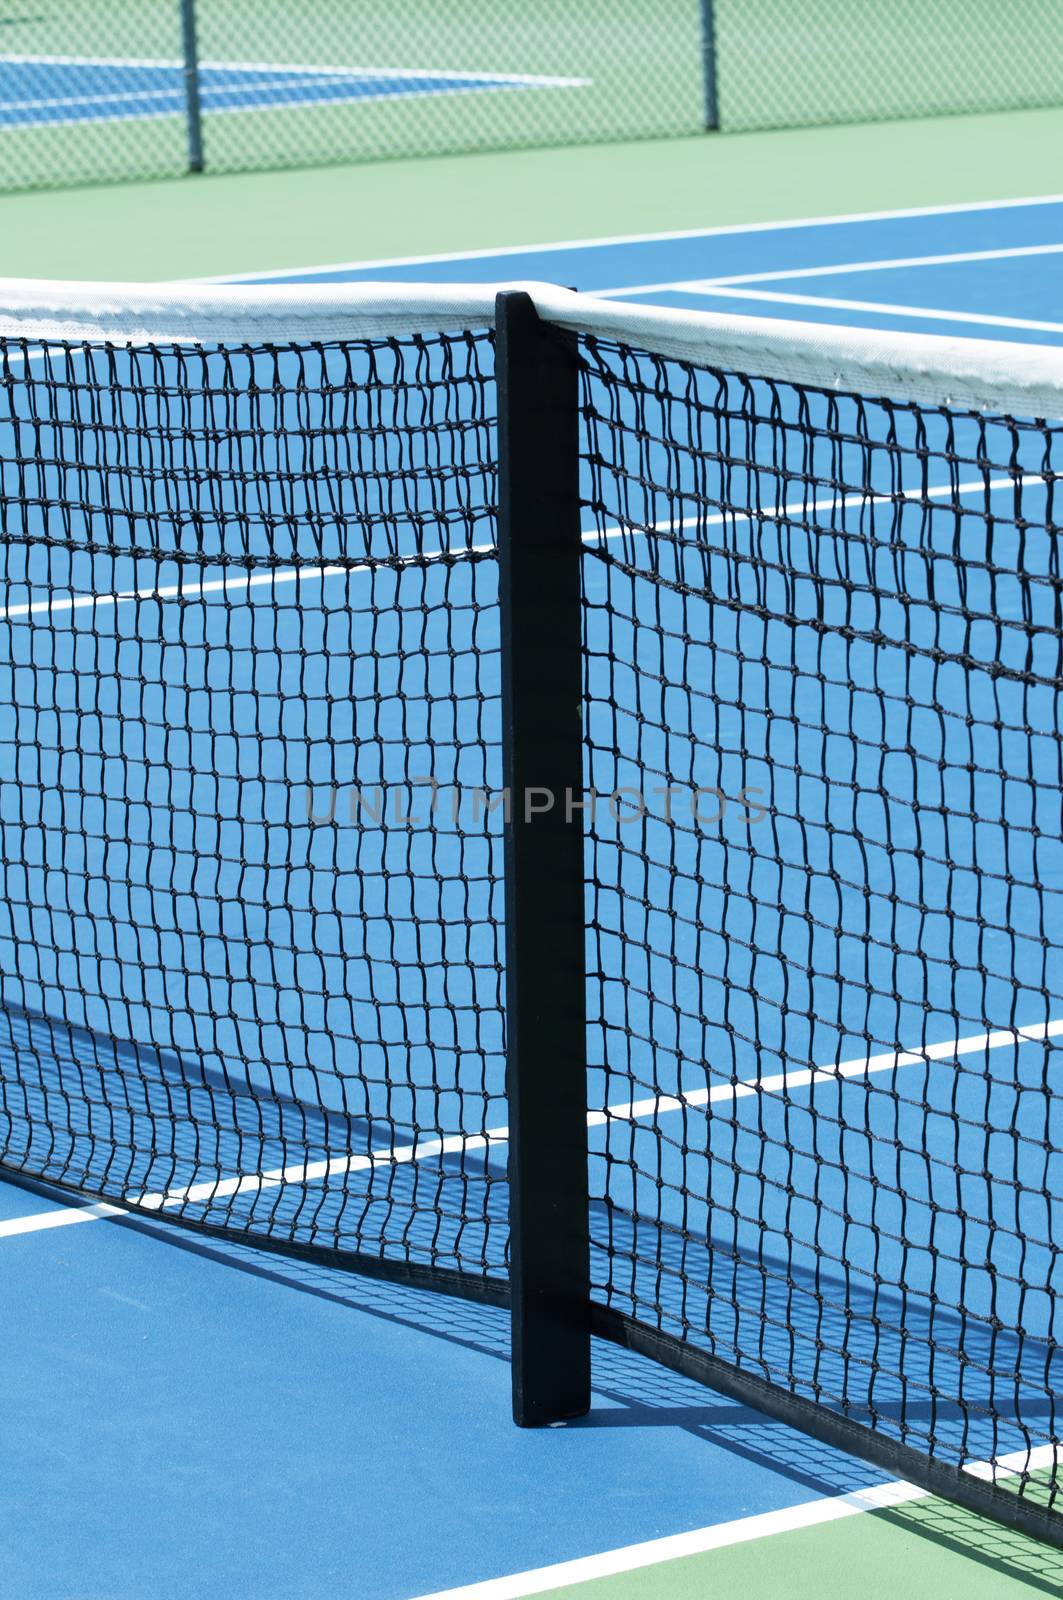 Outdoor tennis court focus on the net support by daoleduc